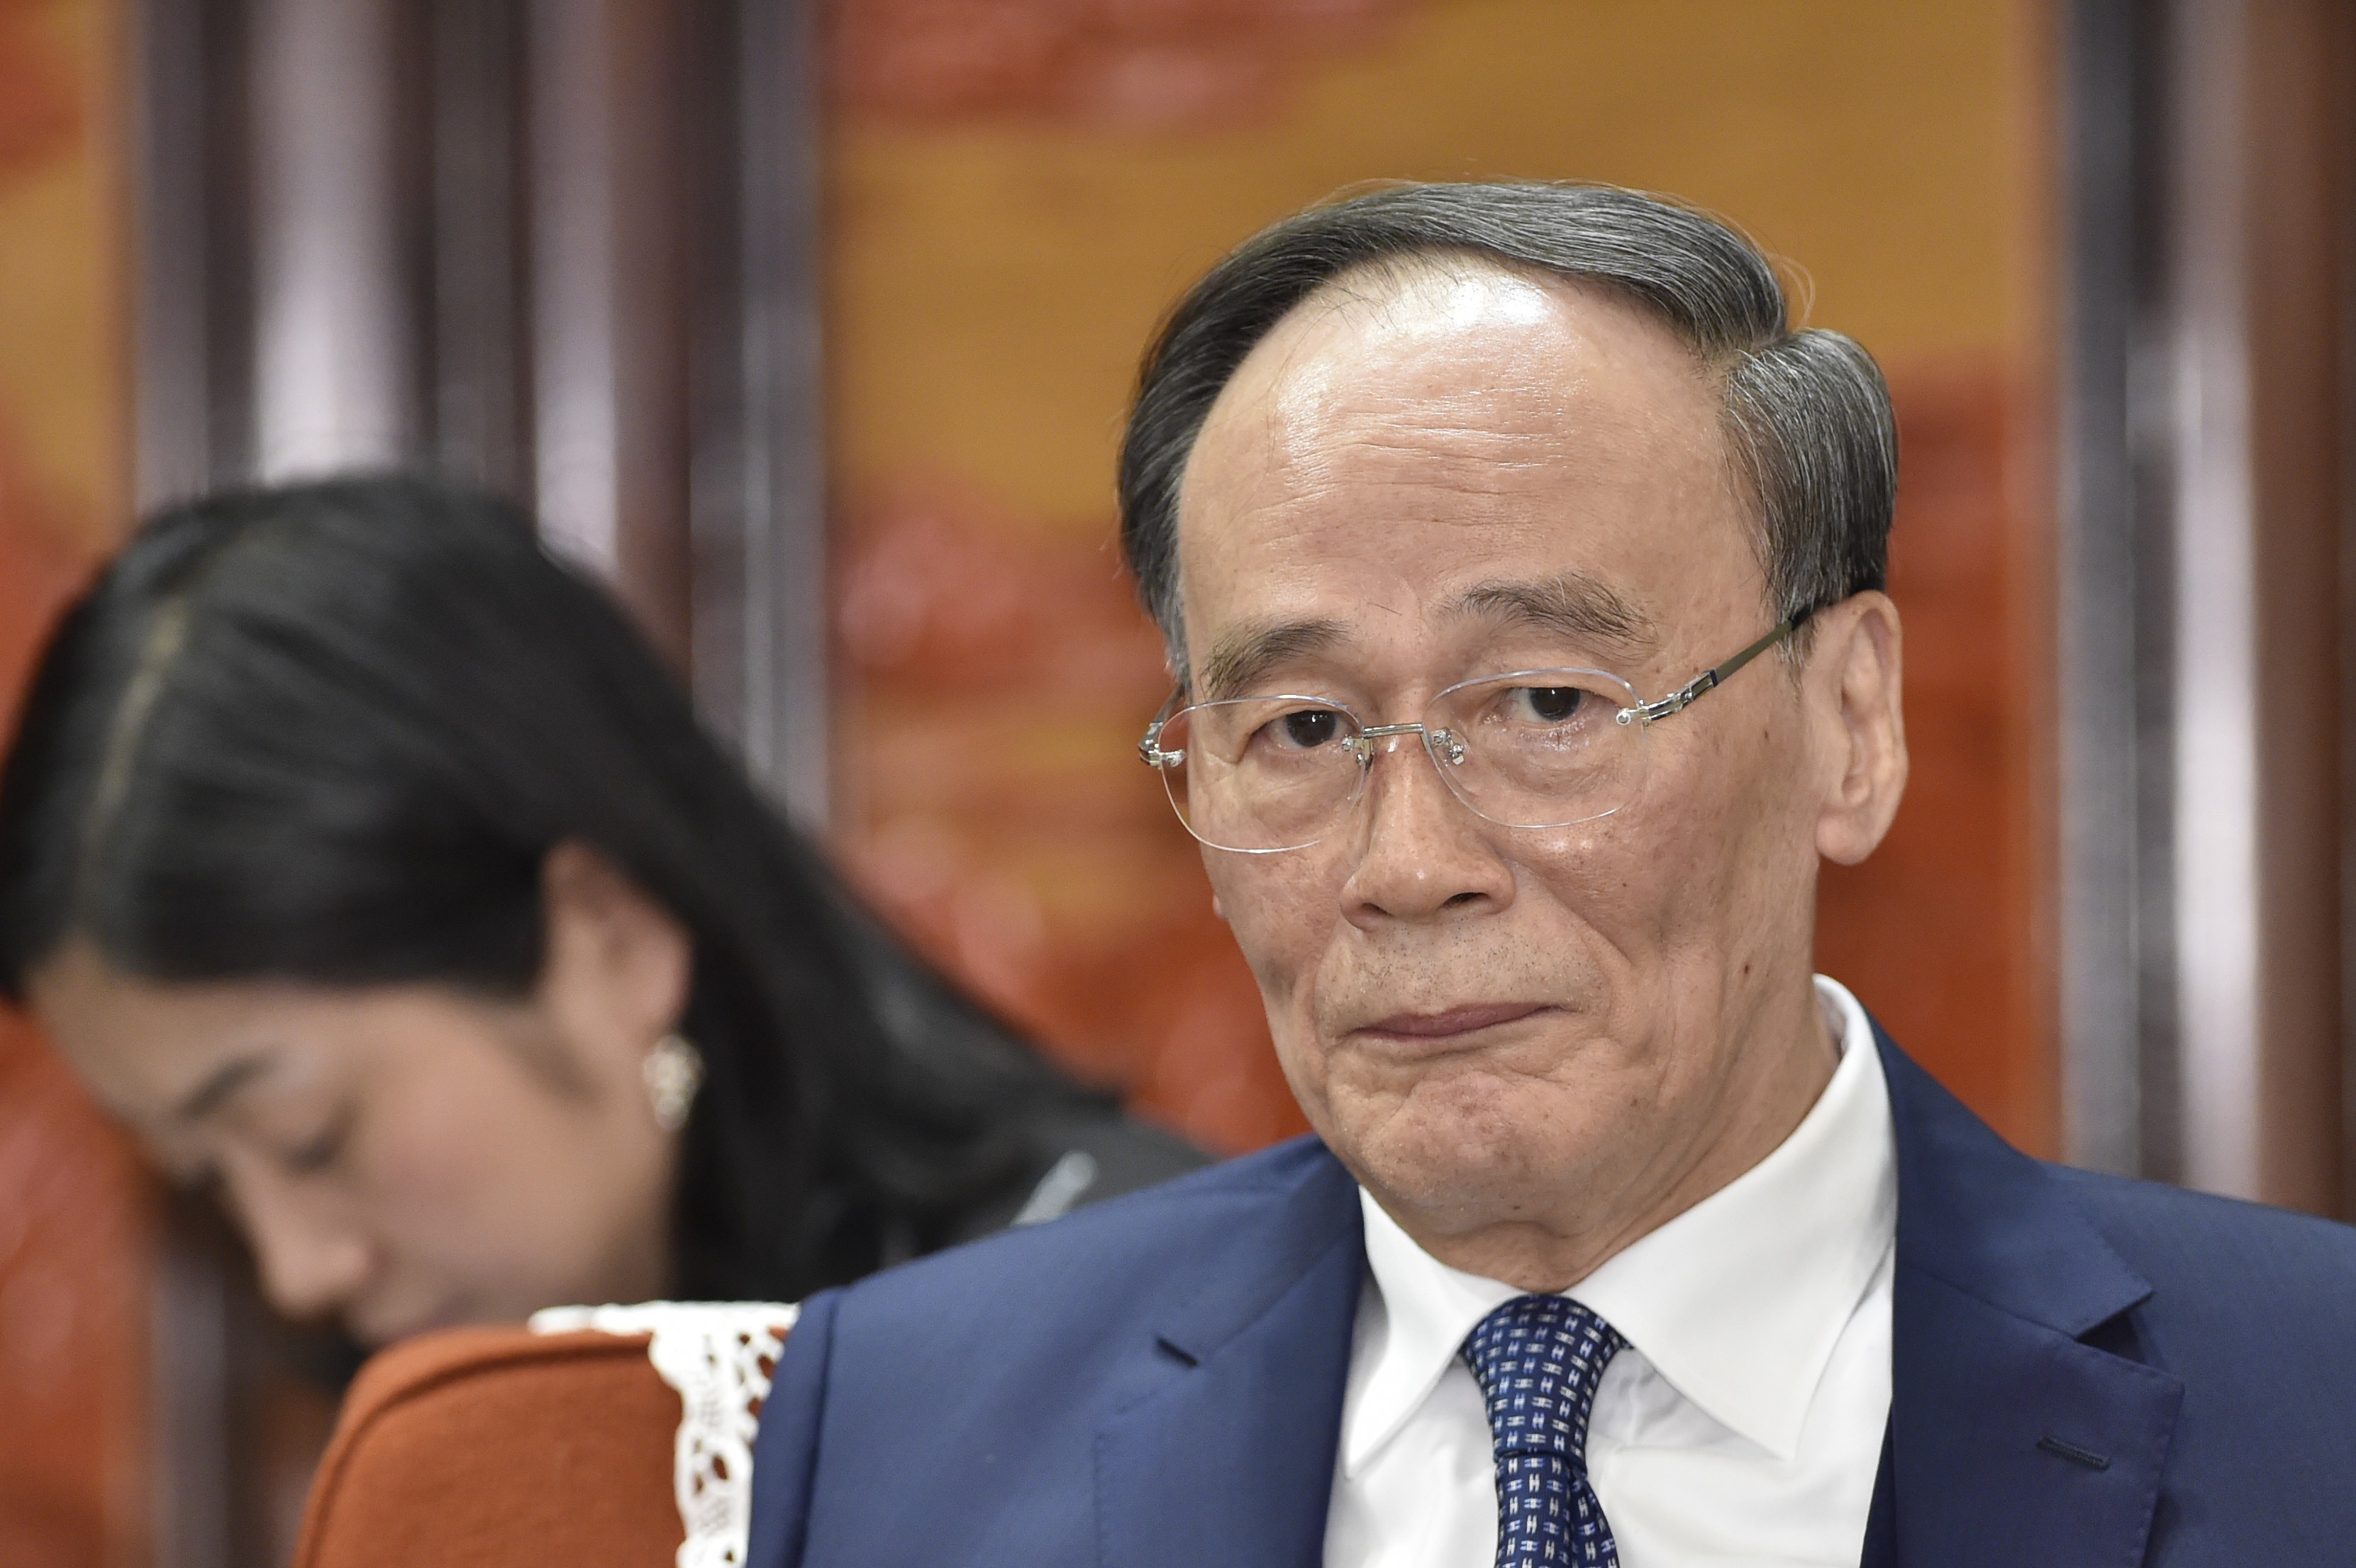 Wang Qishan, 71, has not taken a public role in the trade war between China and the US. Photo: AP